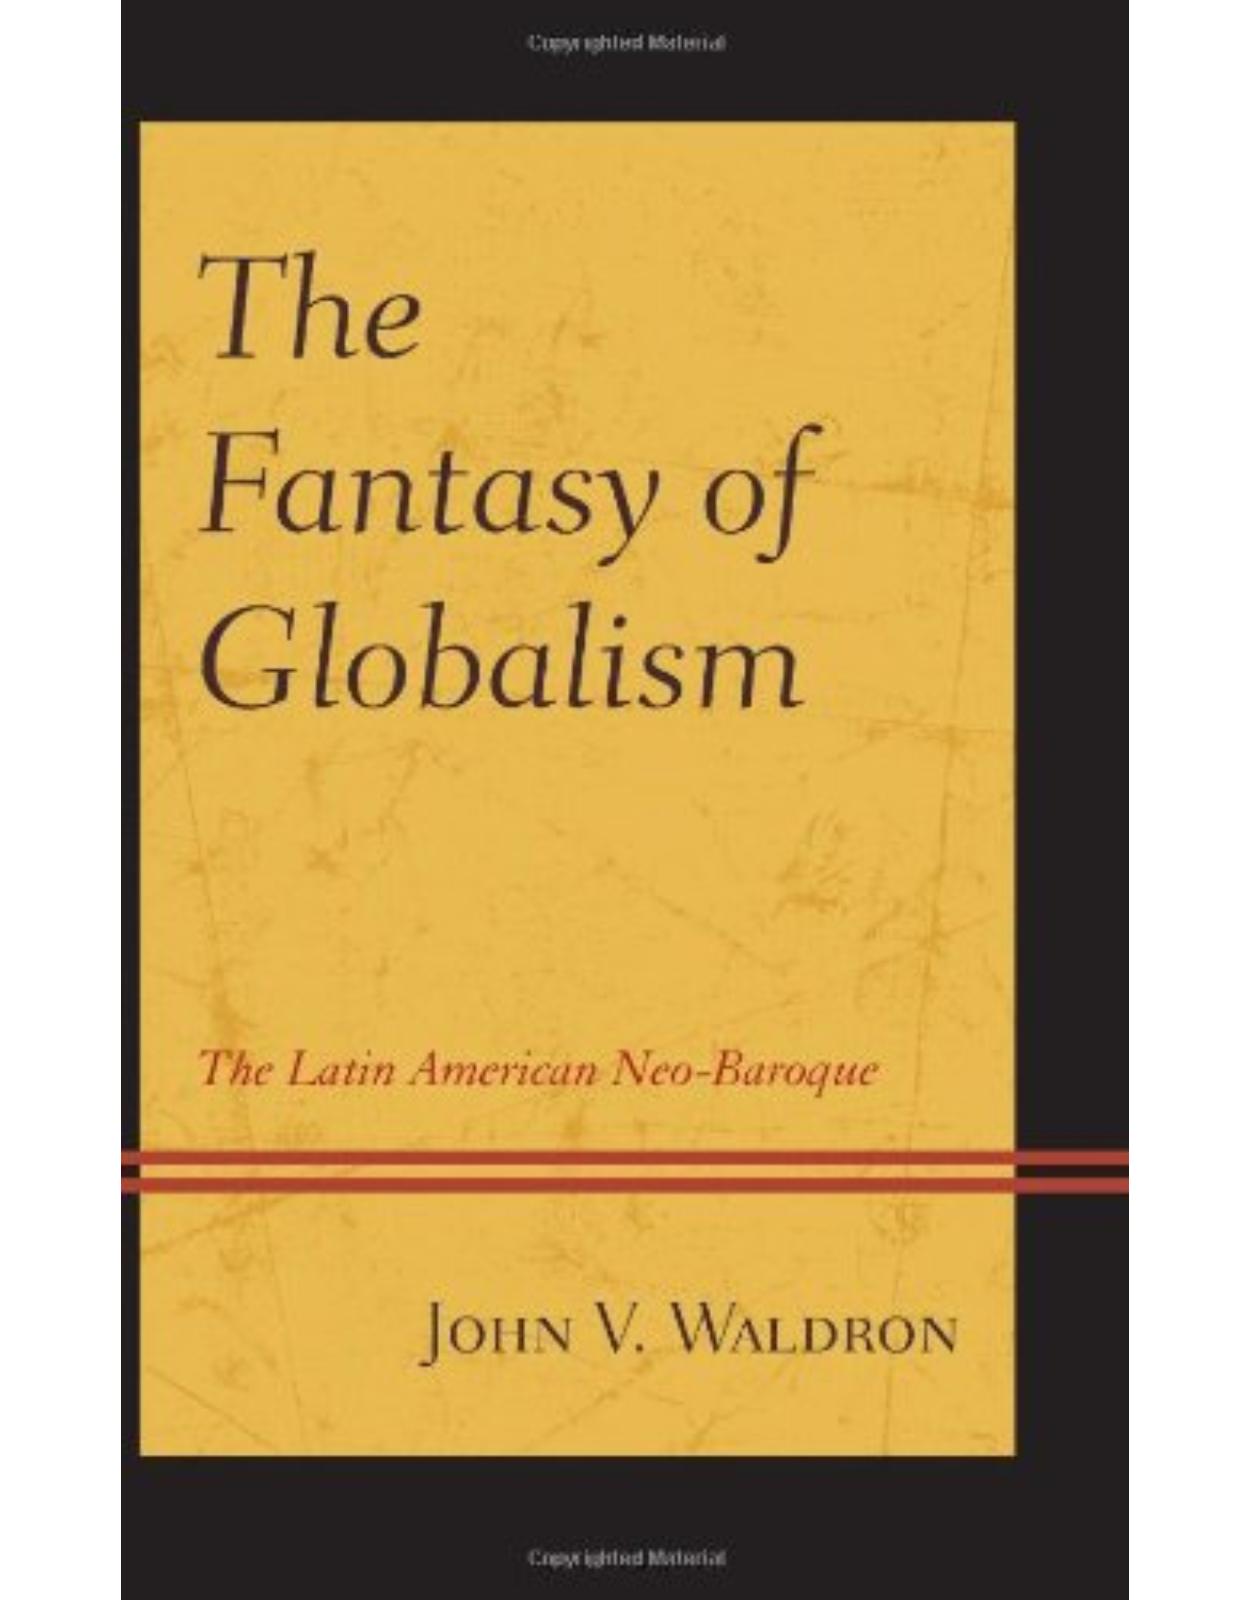 The Fantasy of Globalism: The Latin American Neo-Baroque